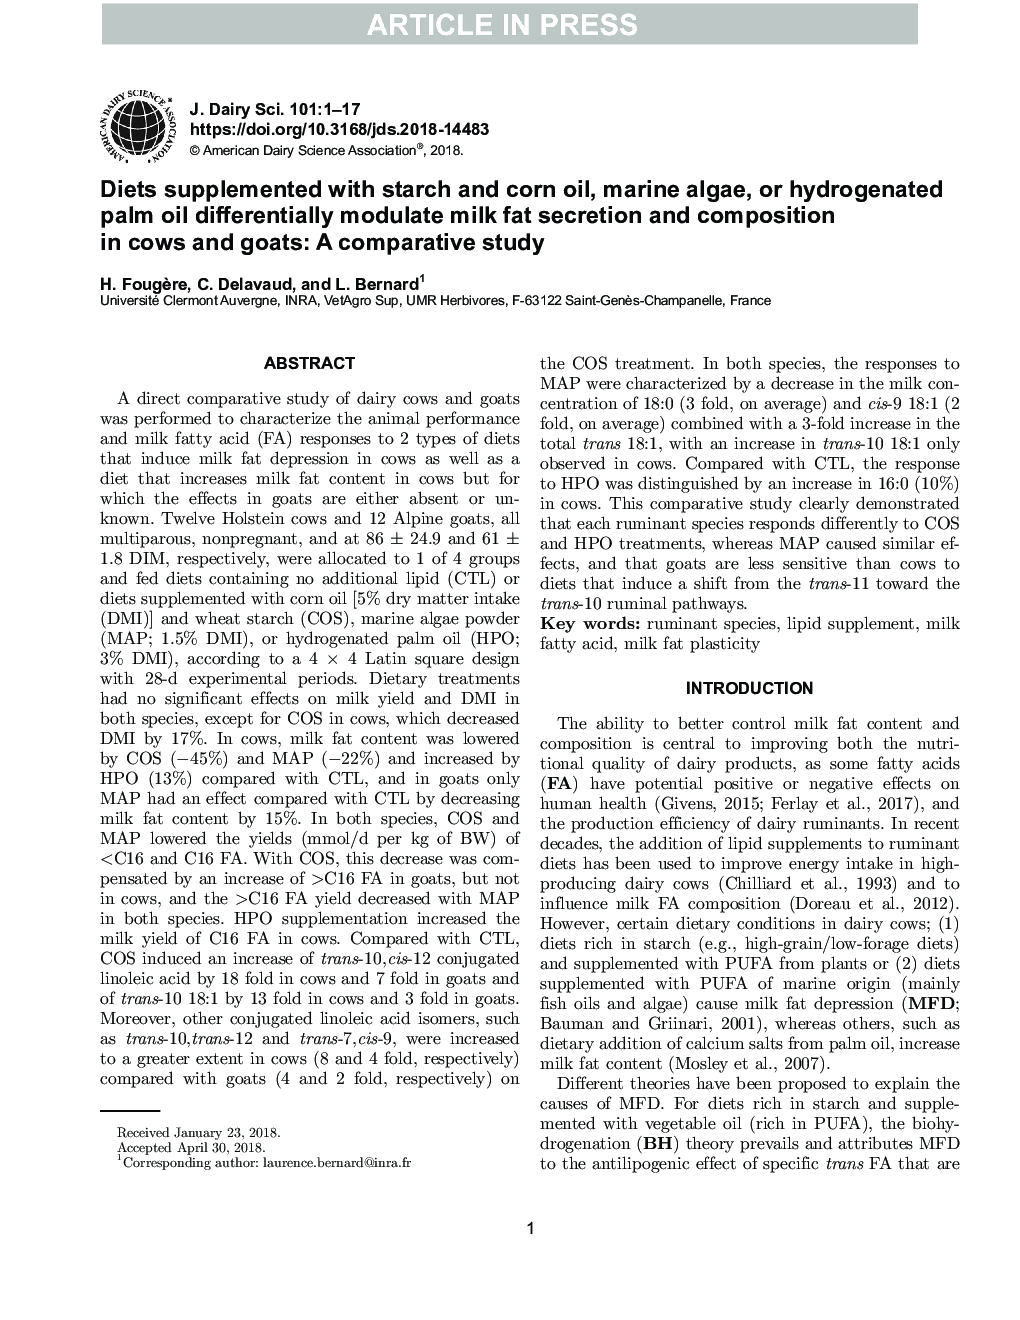 Diets supplemented with starch and corn oil, marine algae, or hydrogenated palm oil differentially modulate milk fat secretion and composition in cows and goats: A comparative study